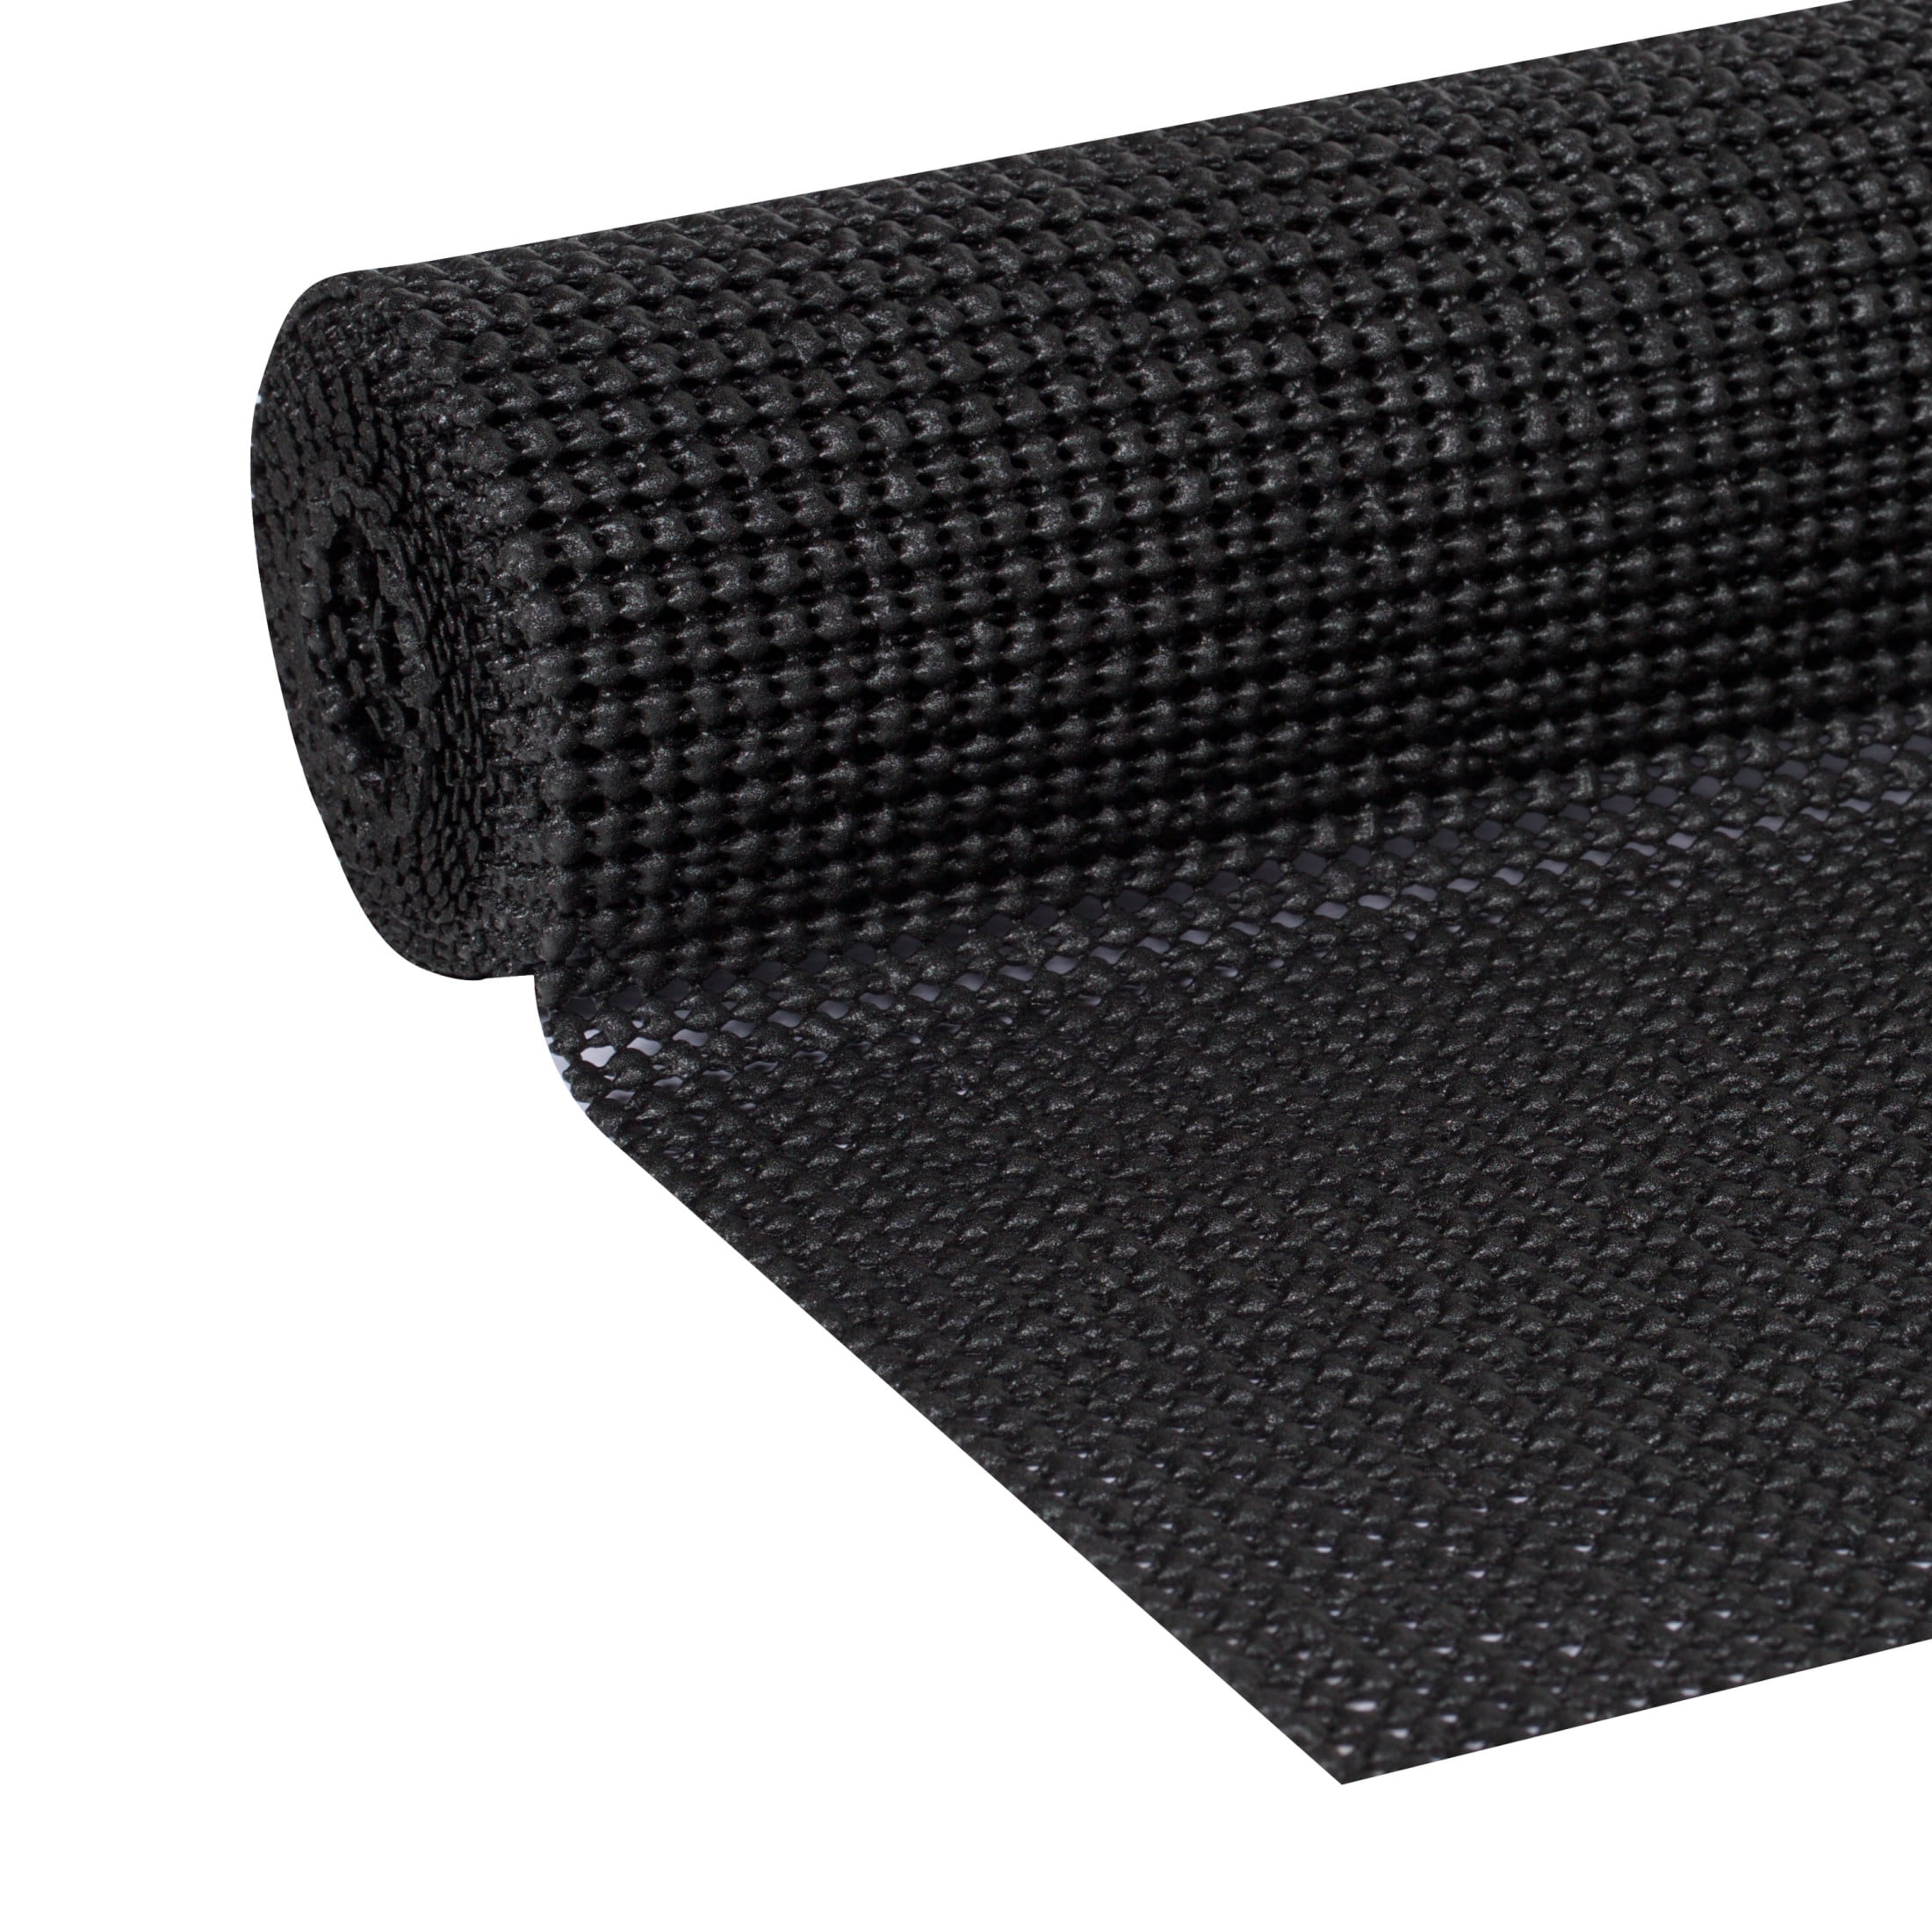  Duralux Black Shelf Liner (one 12 x 10' roll), Drawer Liner, Non-Adhesive, Felt-Backed for Dual Use, Non-Slip, Durable & Waterproof